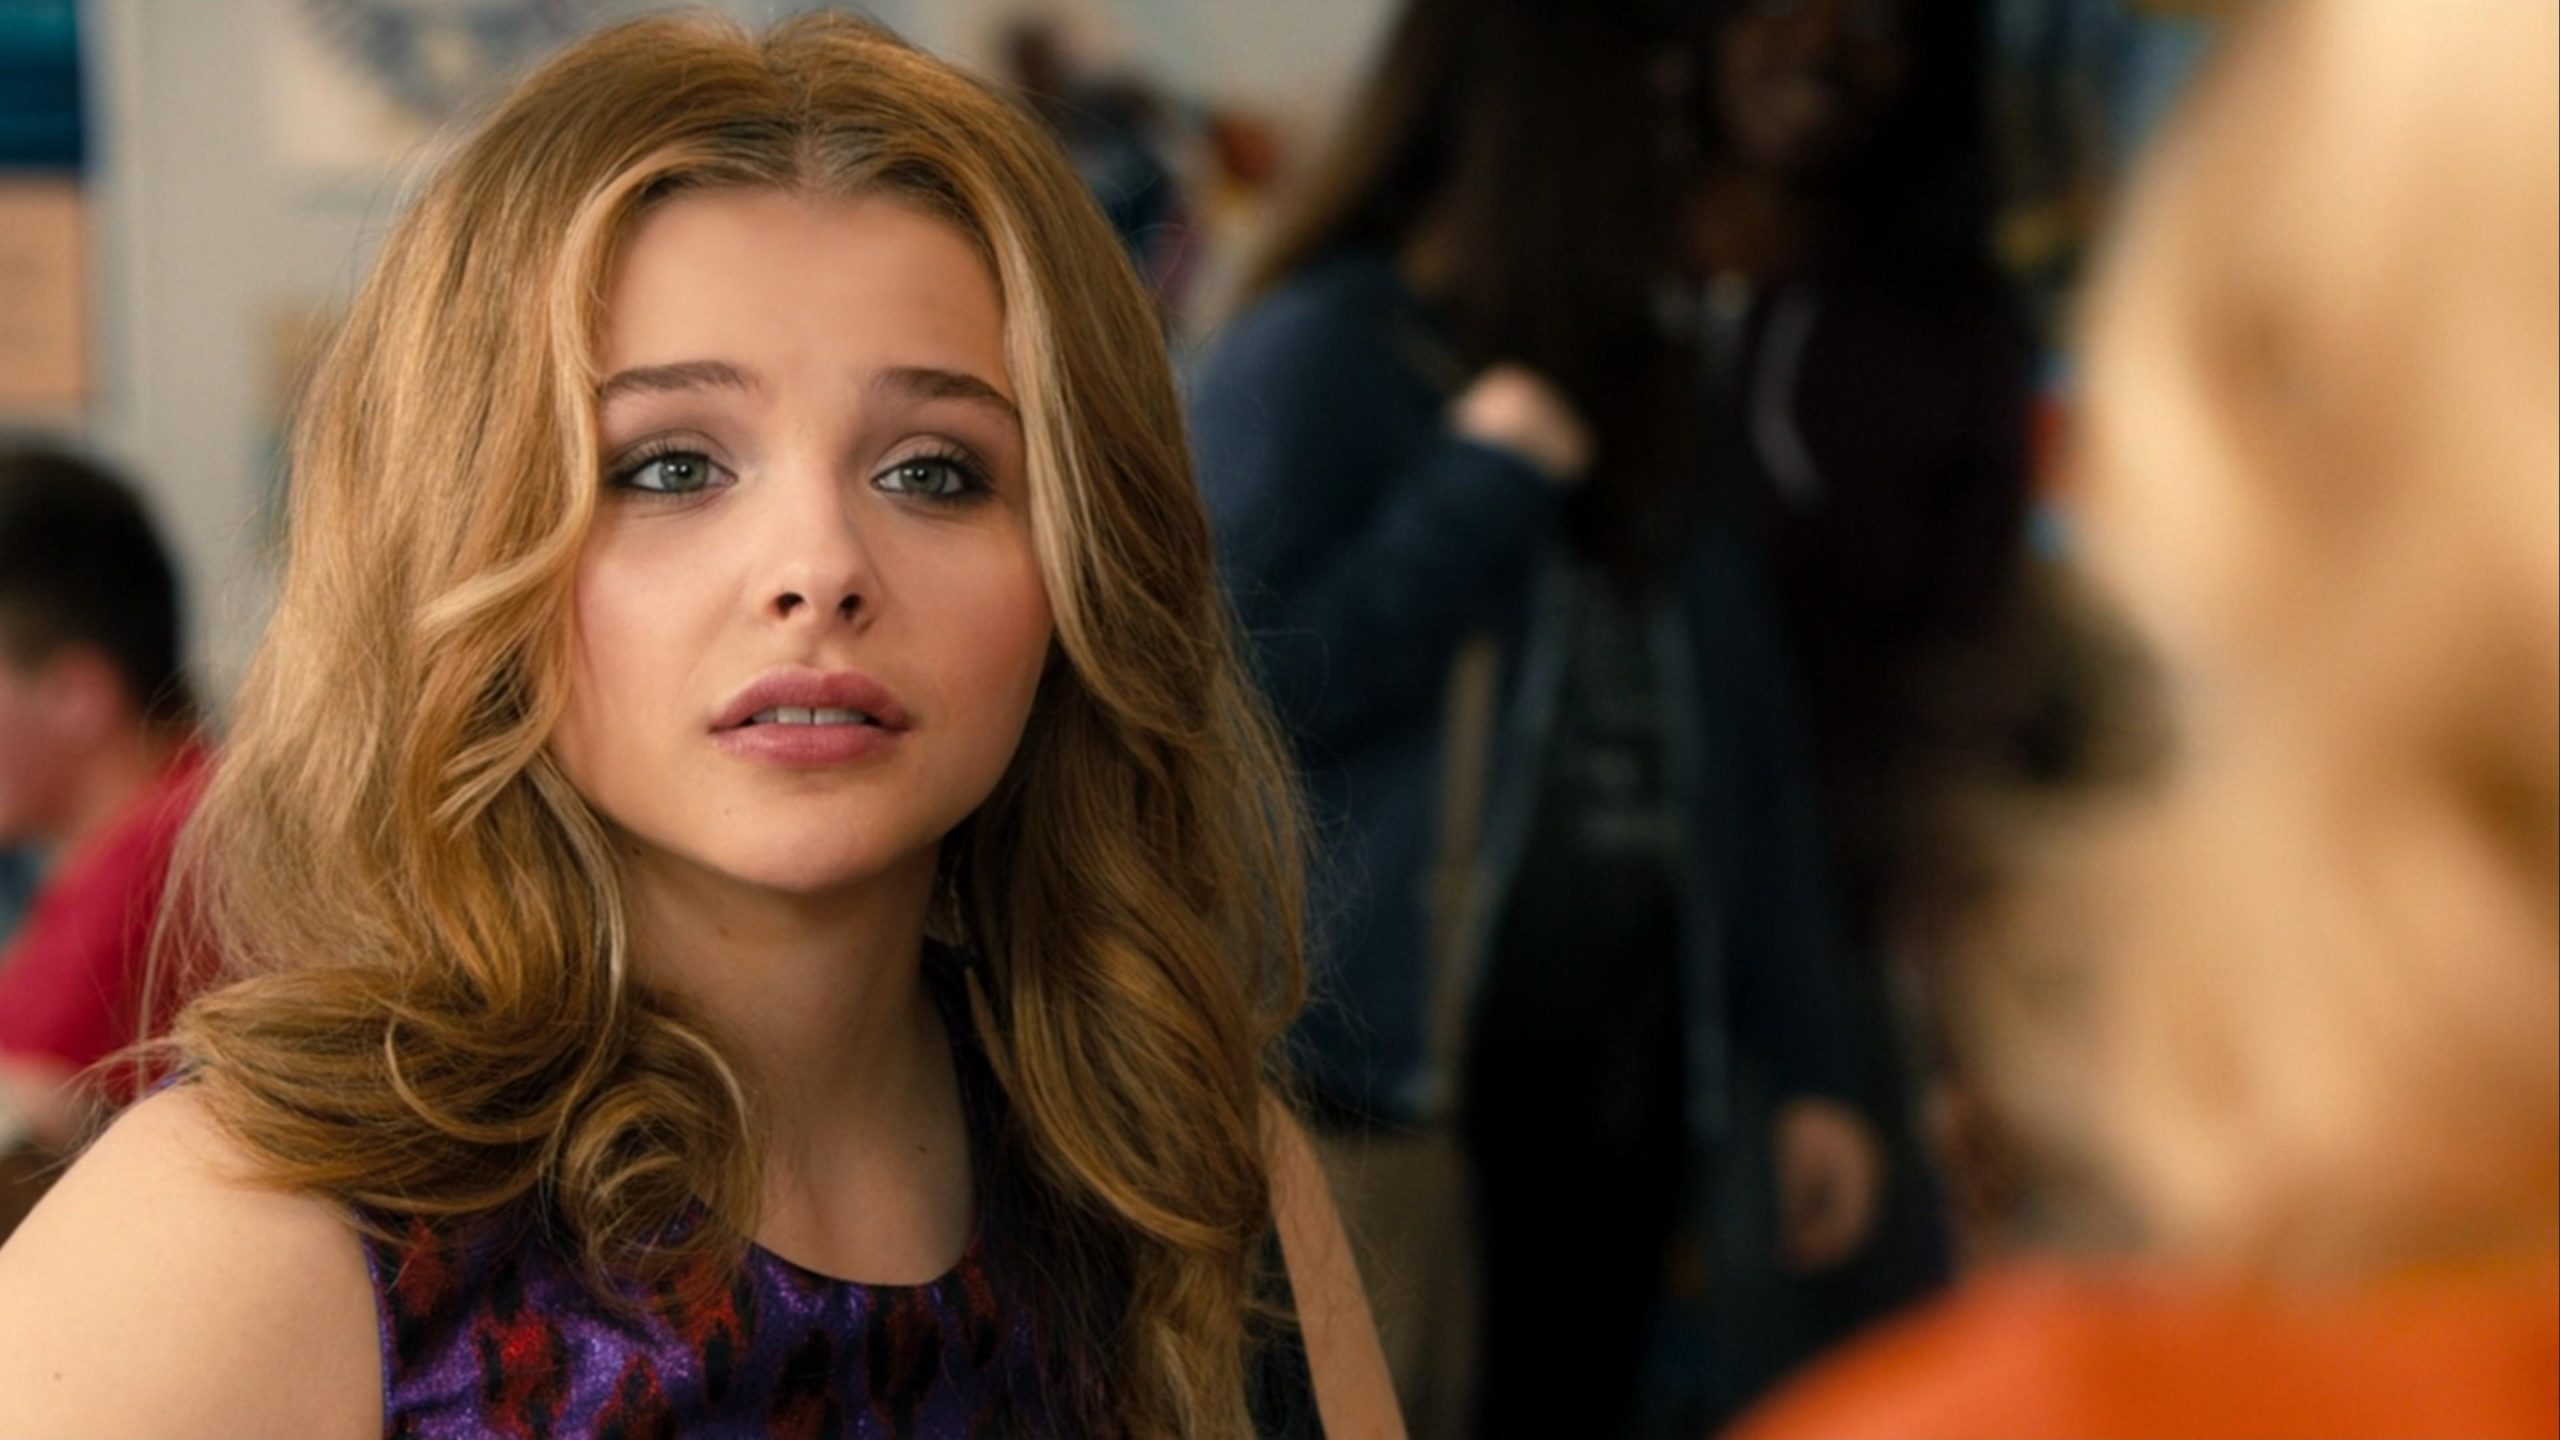 Fans Would Like to See Chloe Grace Moretz as Supergirl